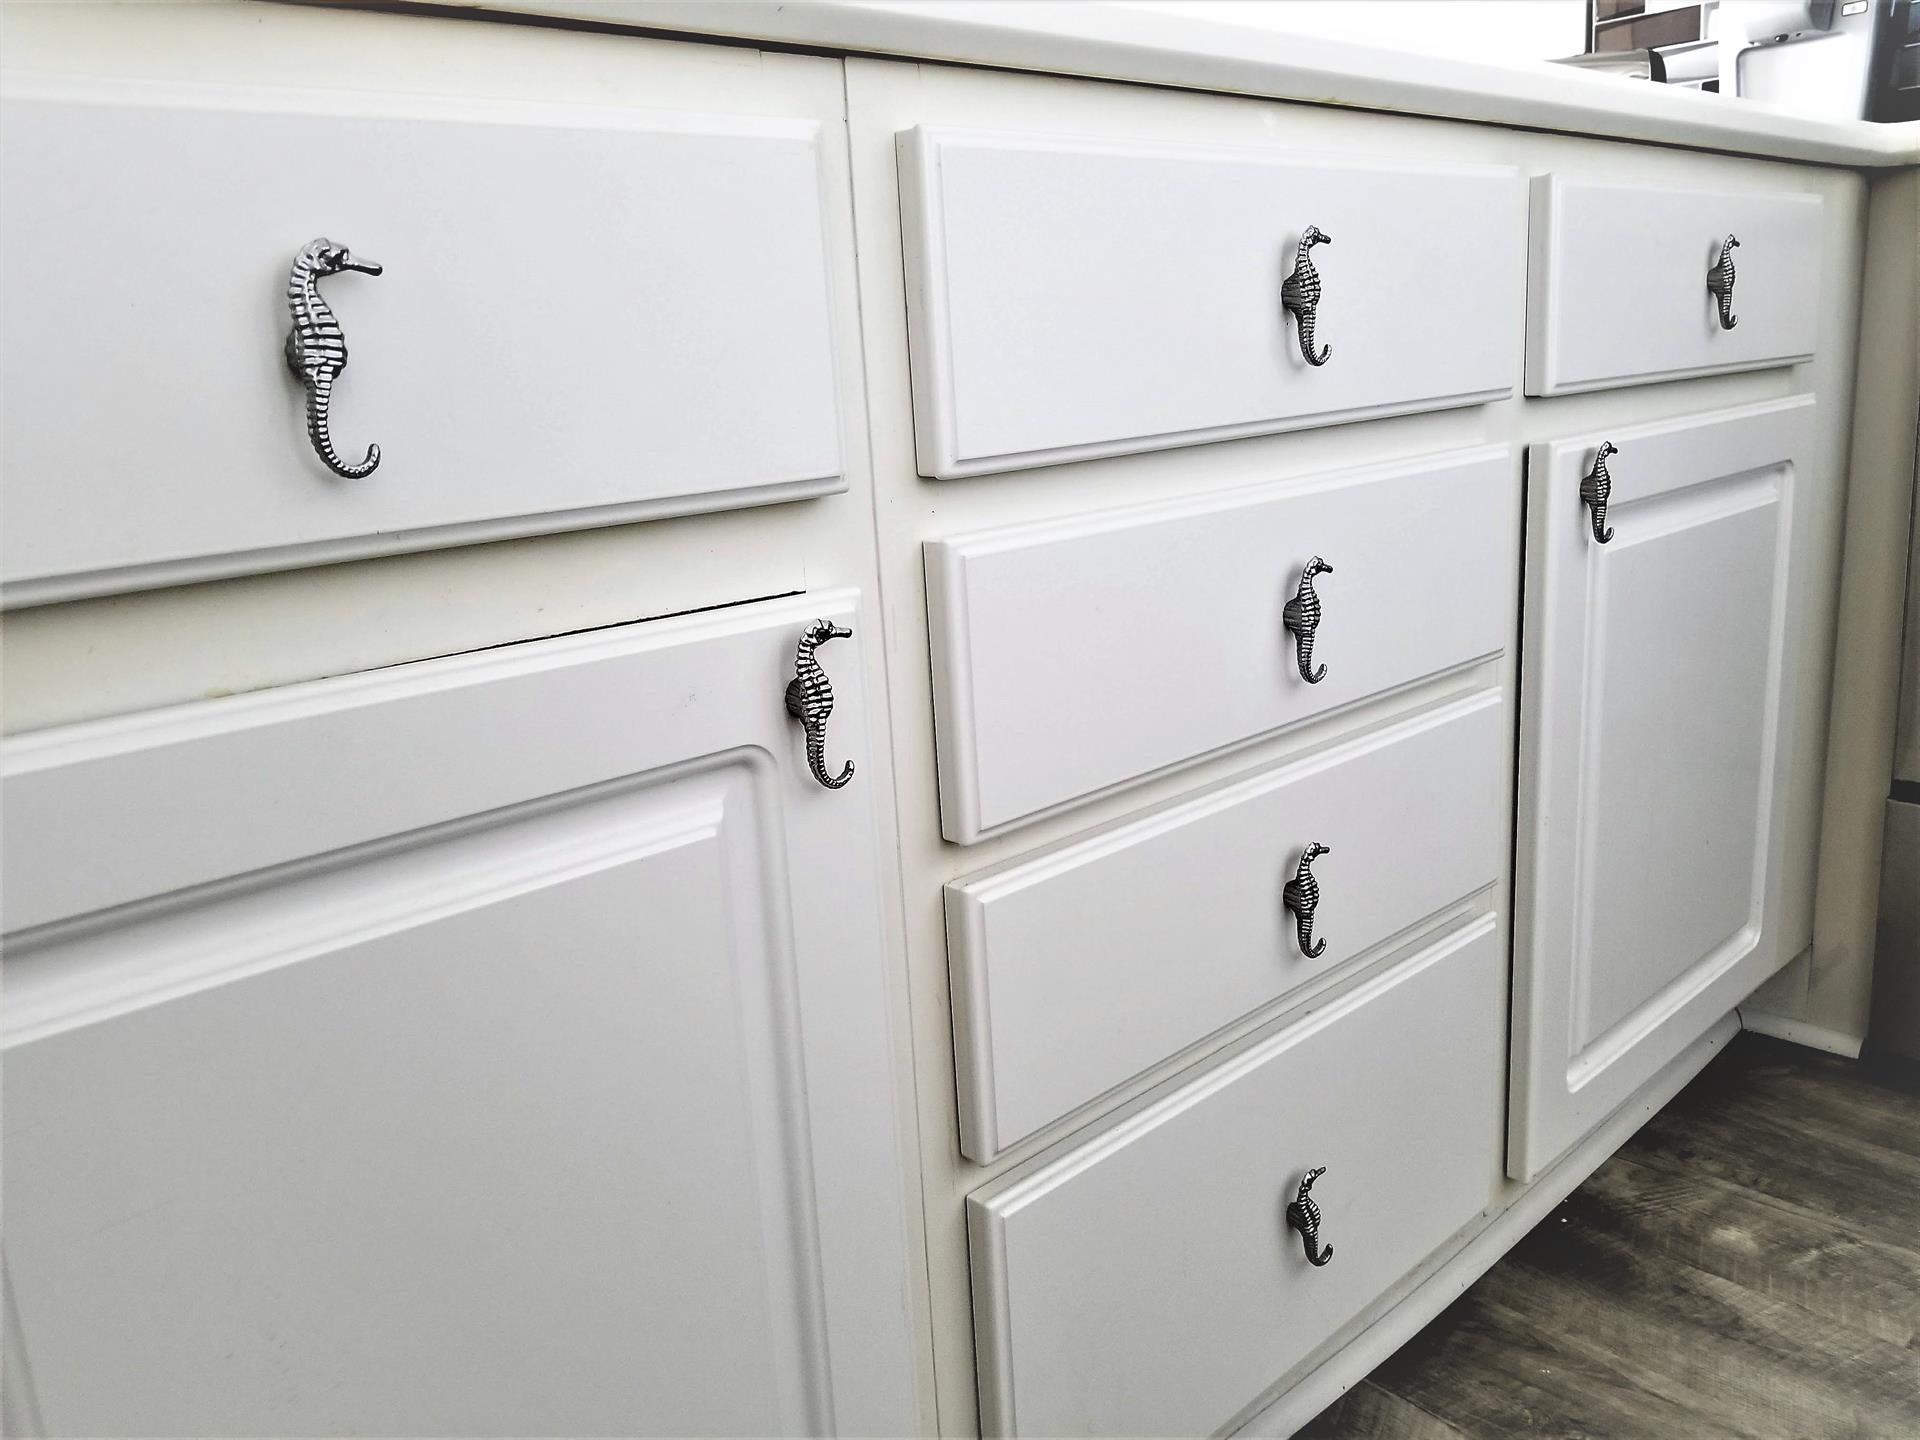 HSRC 619 Kitchen Cabinets With Seahorse Handles